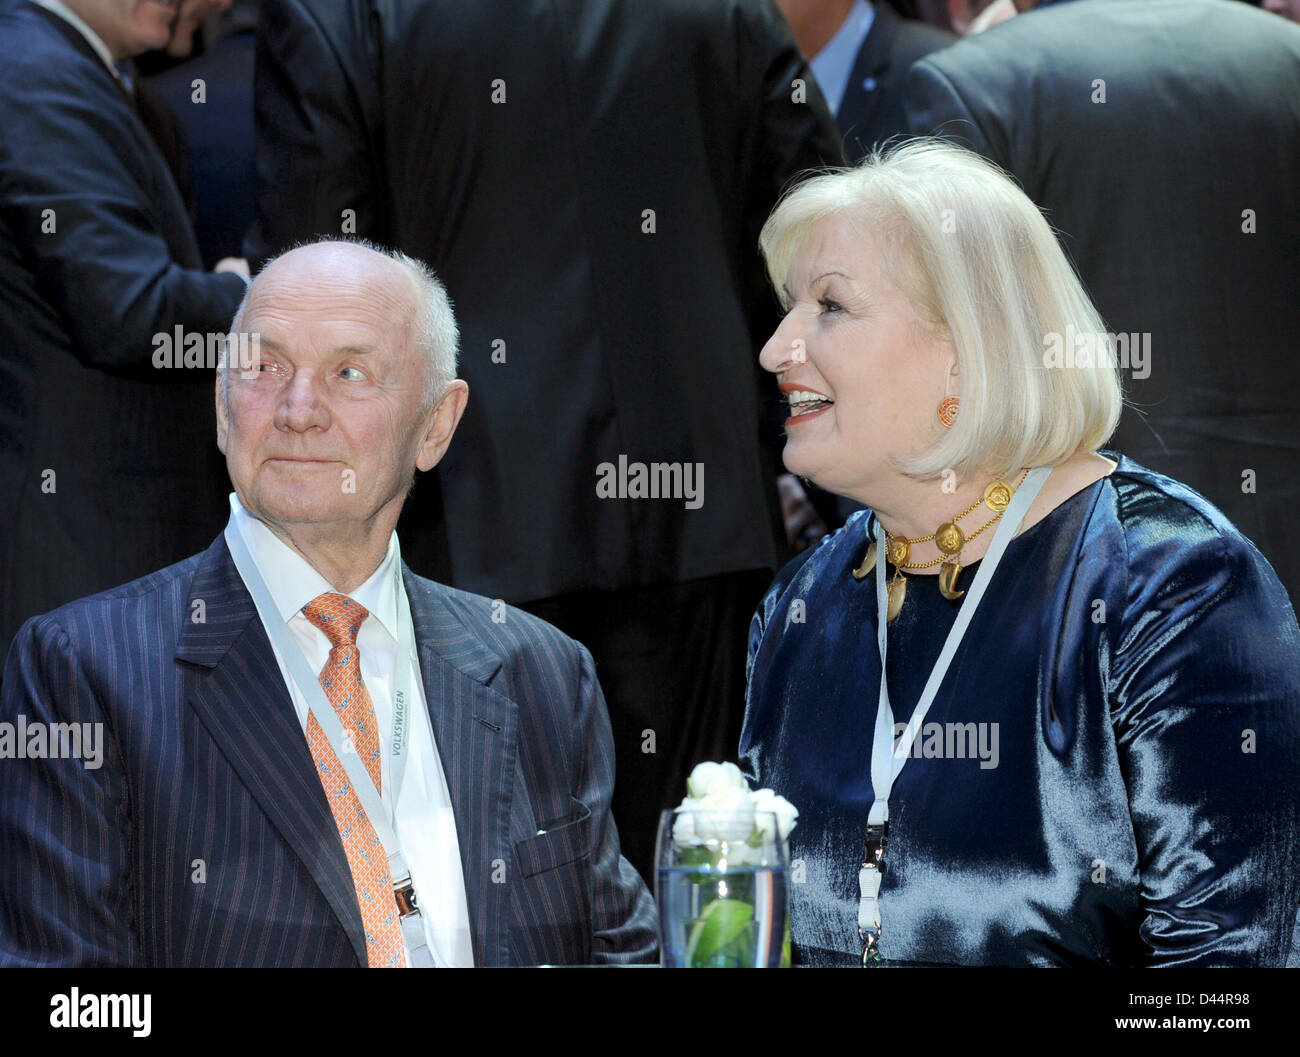 Ferdinand Piech (L), chairman of the supervisory board of Volkswagen, his wife and supervisory board member Ursula Piech attend a motor show hosted by the Volkswagen Group on the evening prior to the first press day of the 83rd International Motor Show Geneva in Geneva, Switzerland, 04 March 2013. Photo: Uli Deck Stock Photo